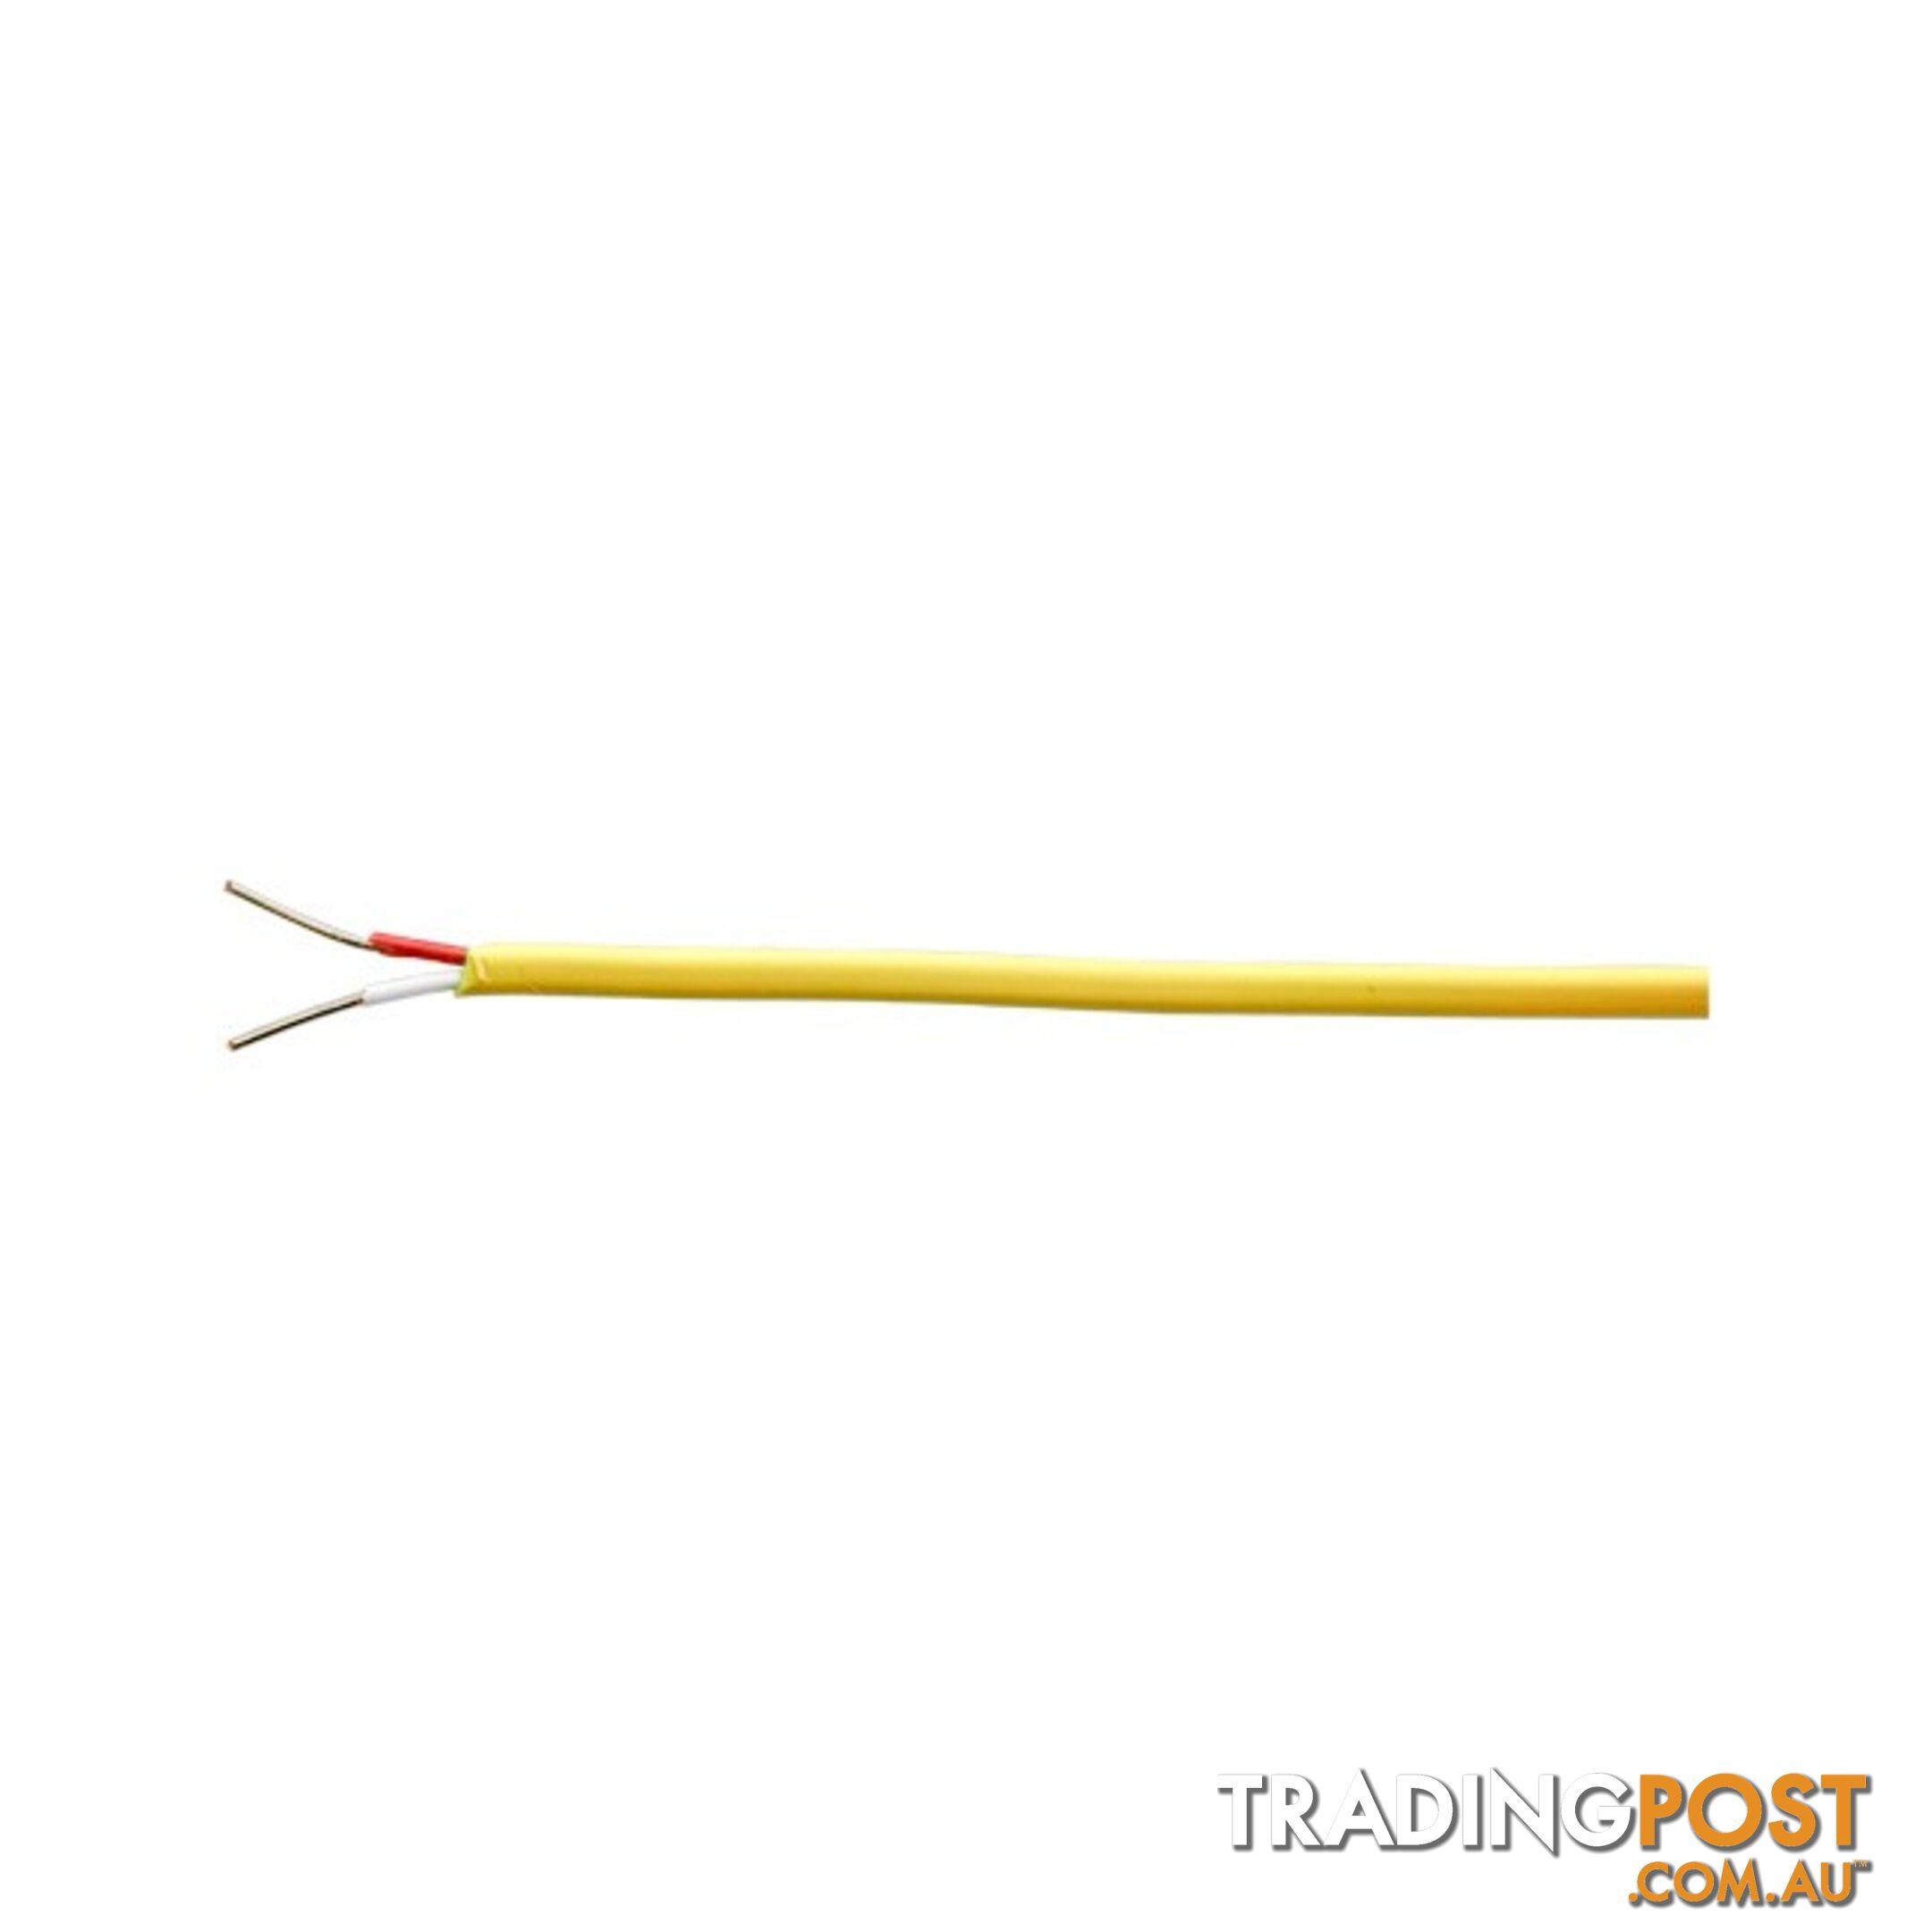 KBWIREYEL-1M 0.9MM AIPHONE CABLE - 1M YELLOW PER METRE TSW2190